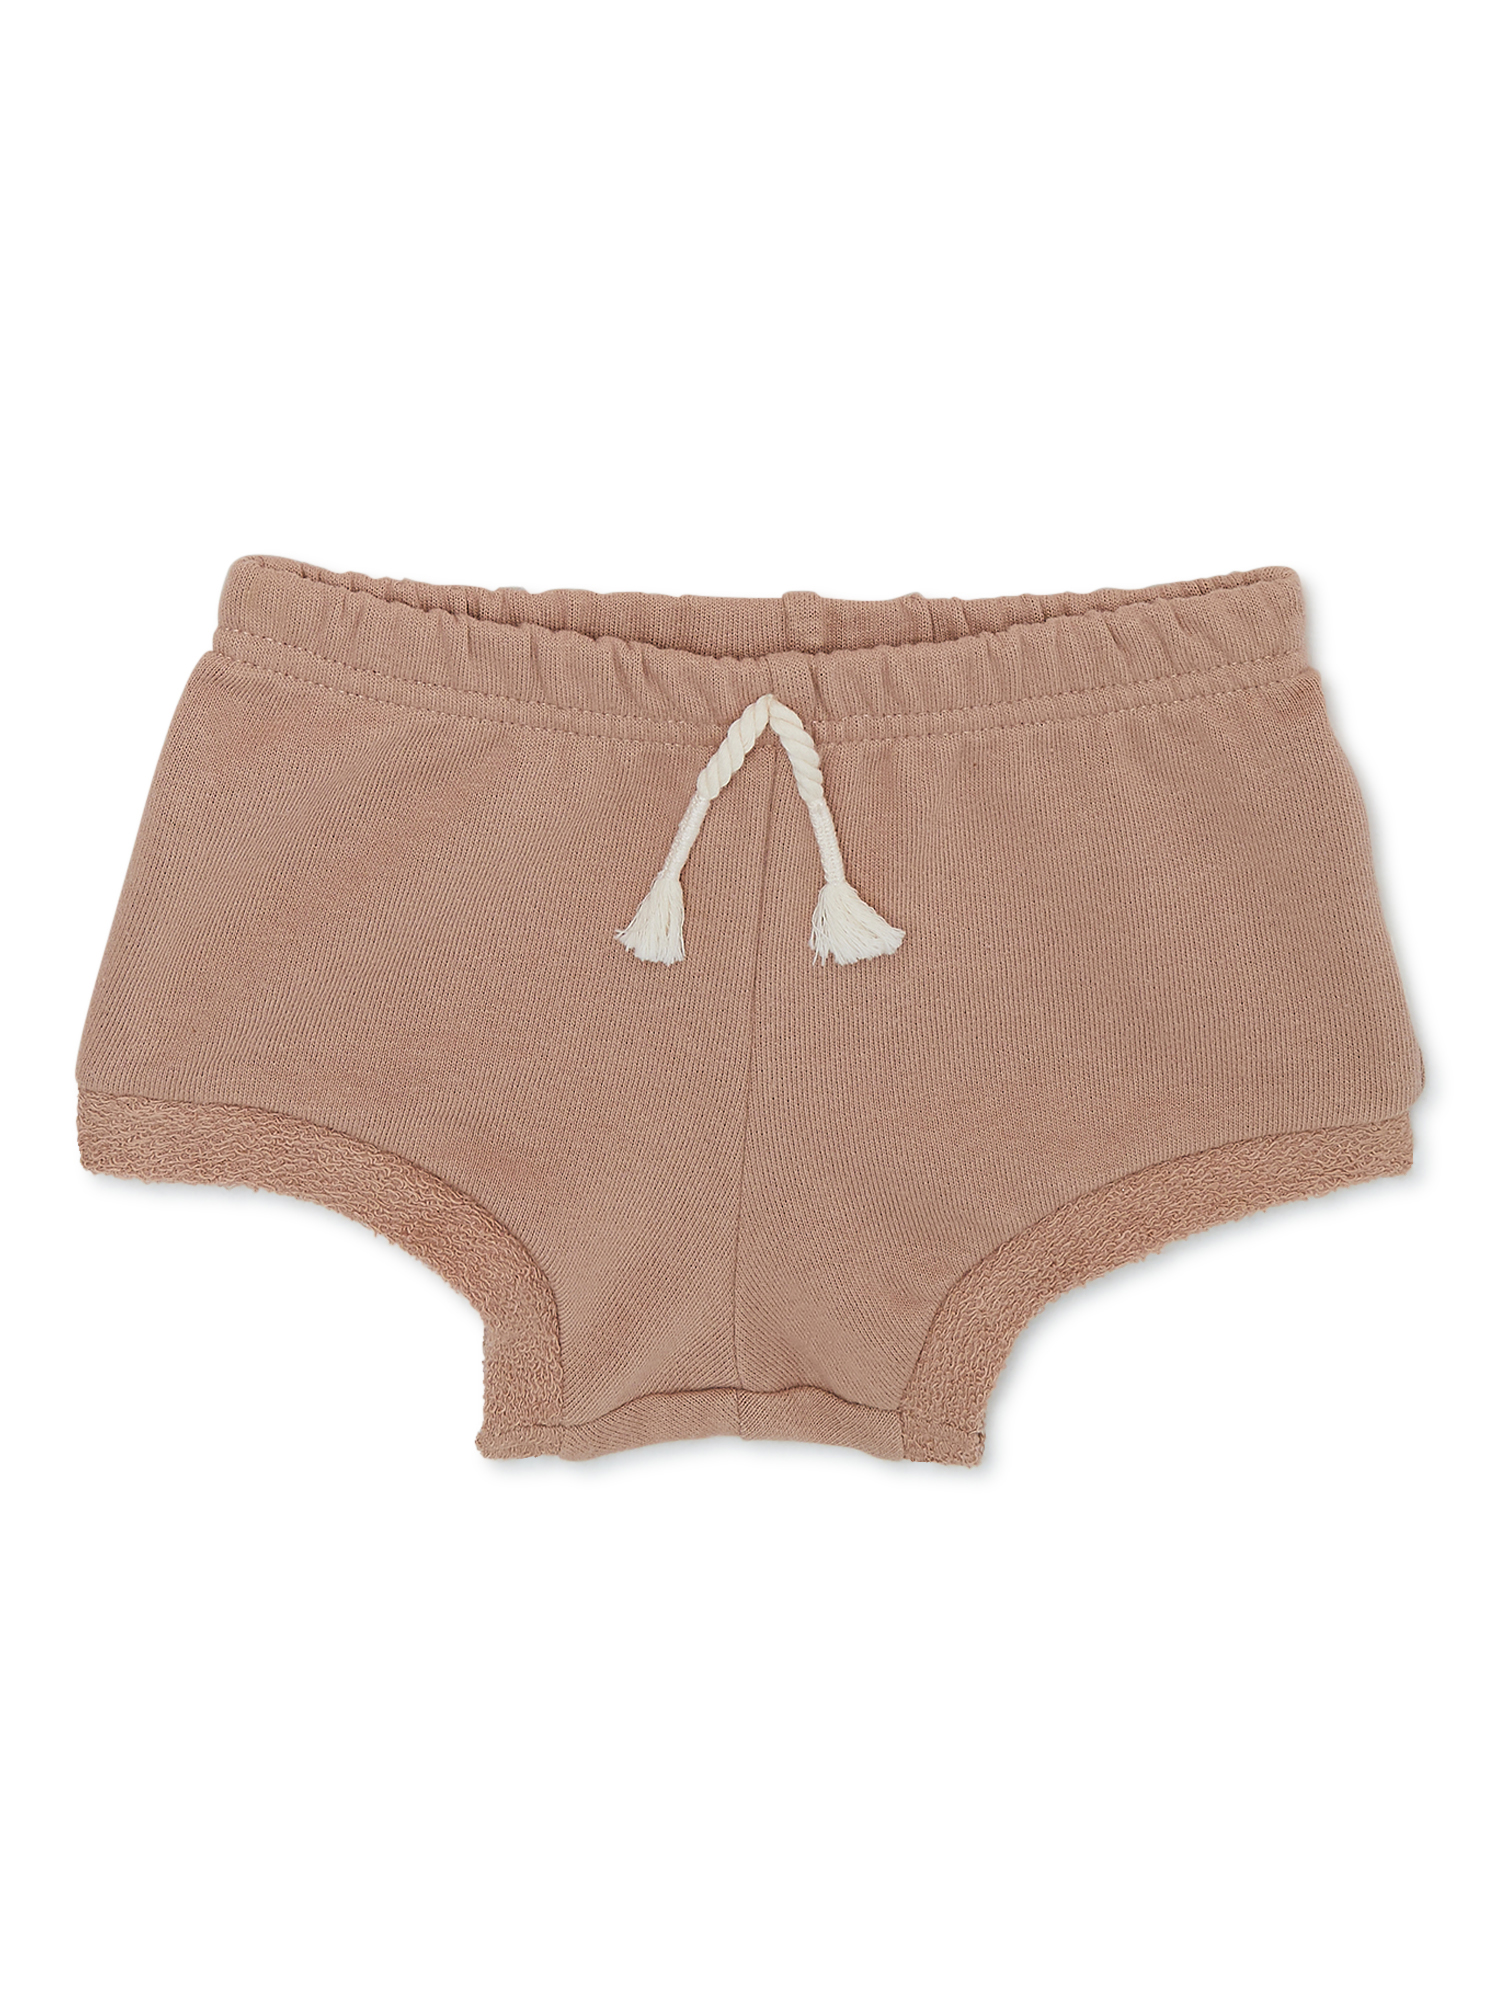 easy-peasy Baby Organic Bloomer Shorts, Sizes 0-24 Months - image 1 of 7